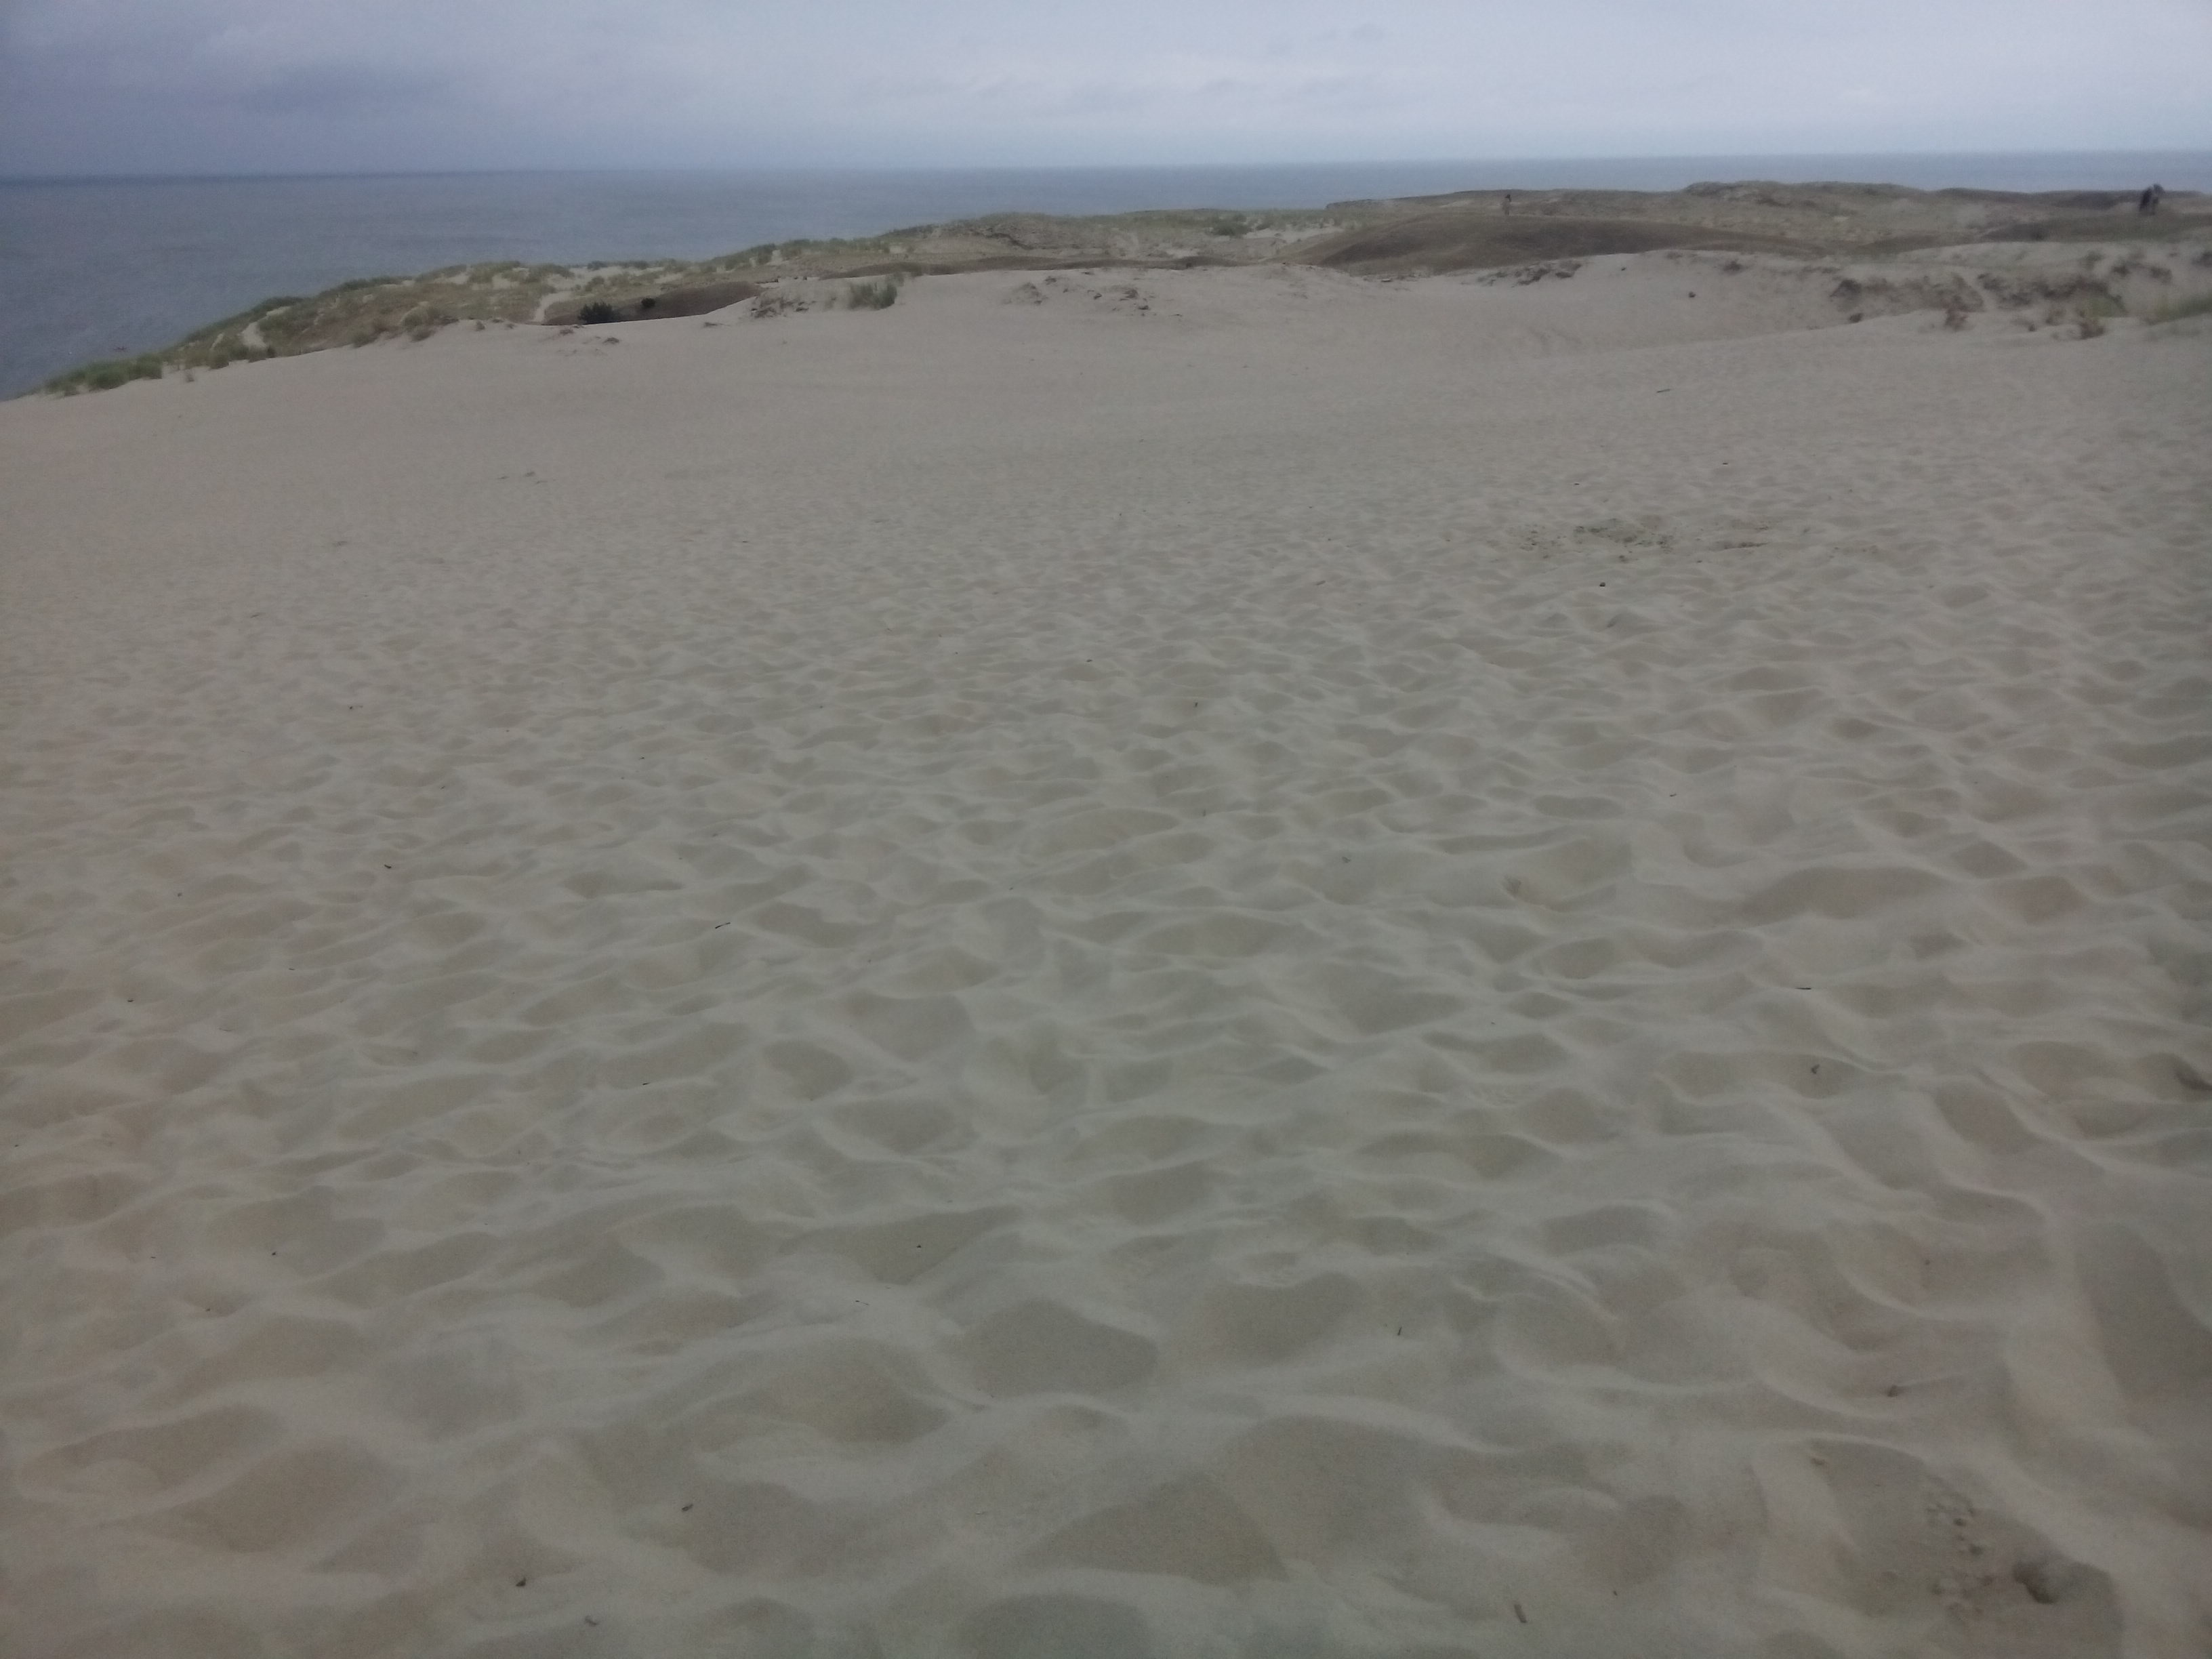 An expanse of soft sand reaches into the distance, and the sea is visible beyond